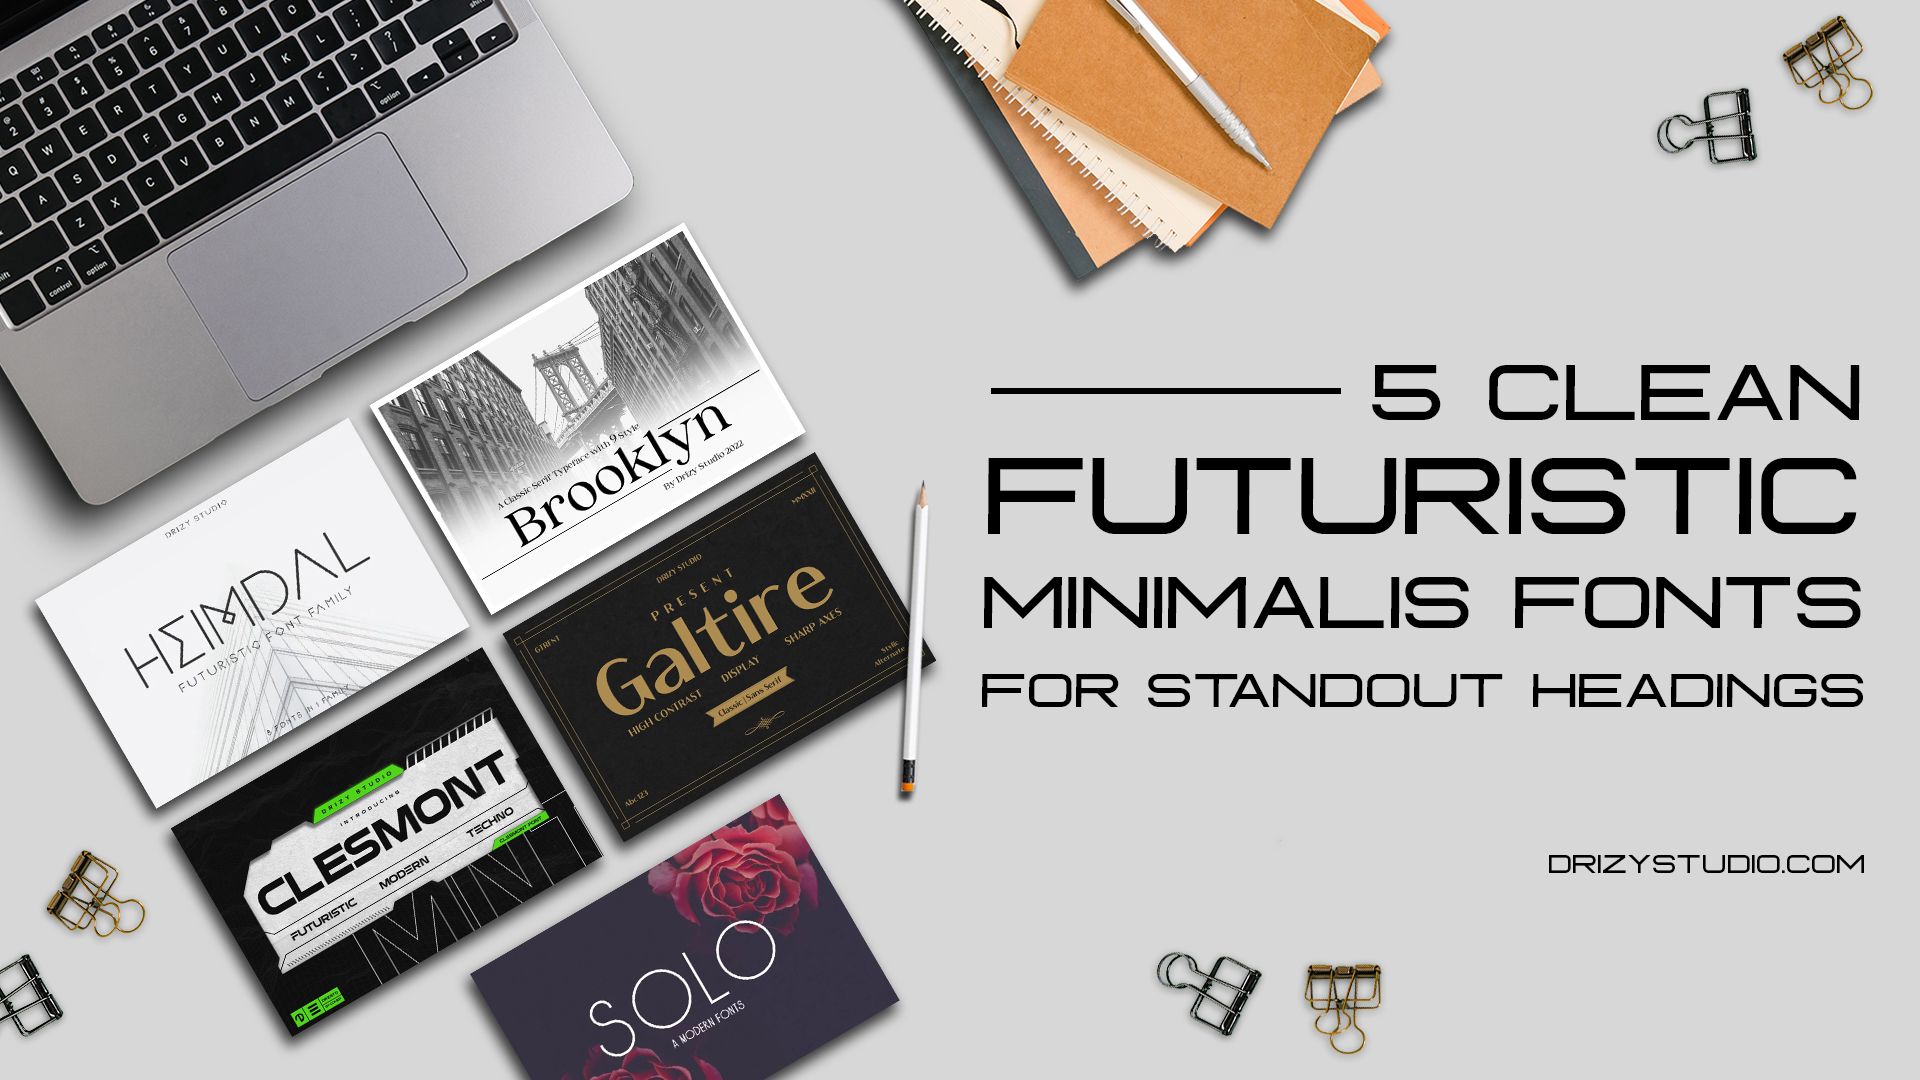 5 Clean Futuristic Minimalist Fonts For Standout Headings